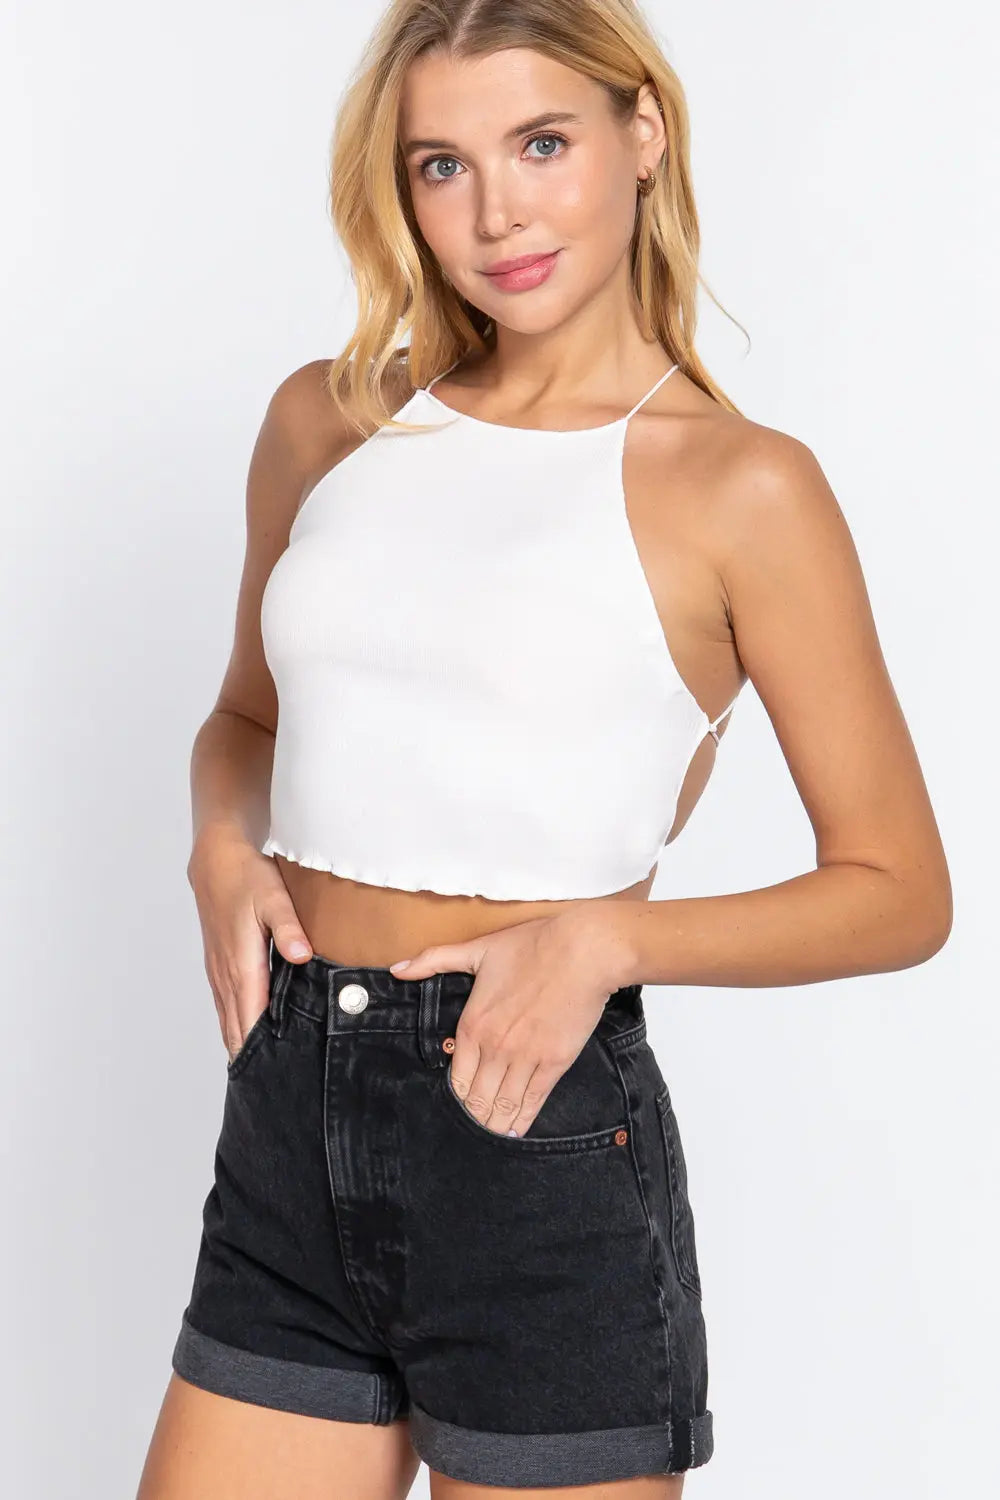 Lace Up Open Cross Back Crop Cami Sunny EvE Fashion